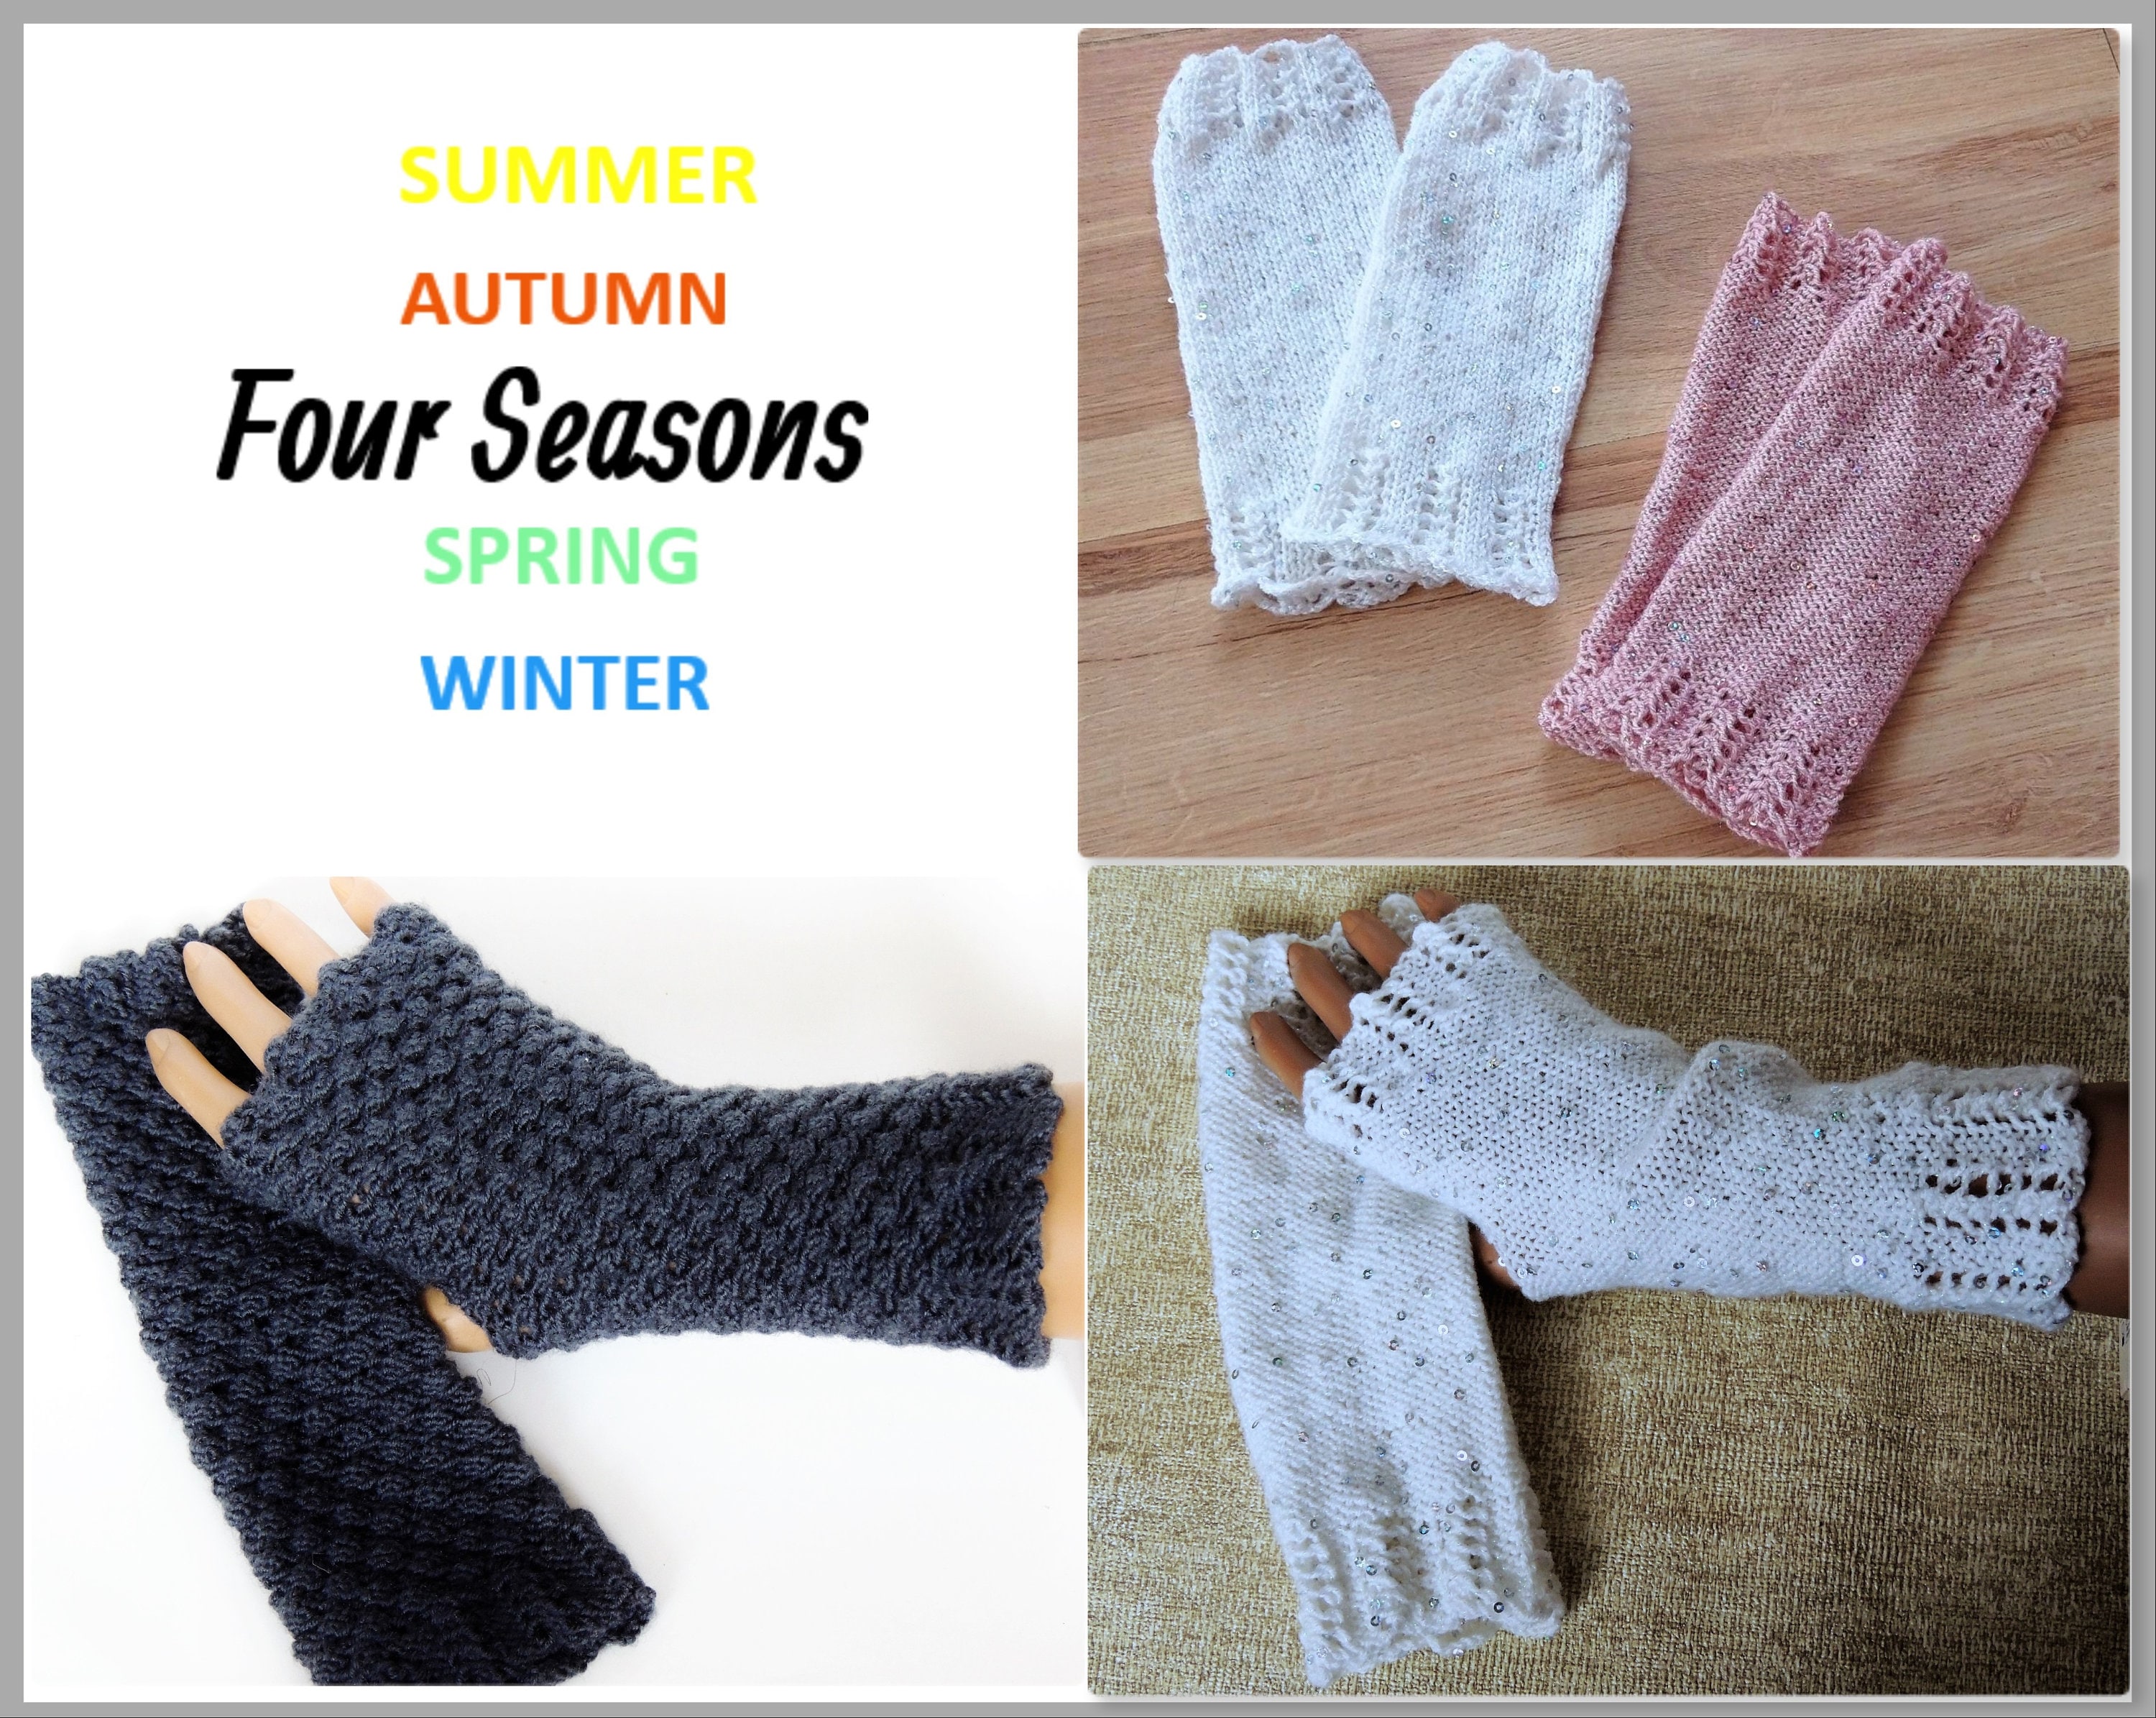 Buy Hand Knitted Wrist Warmers Fingerless Mittens With Sequins